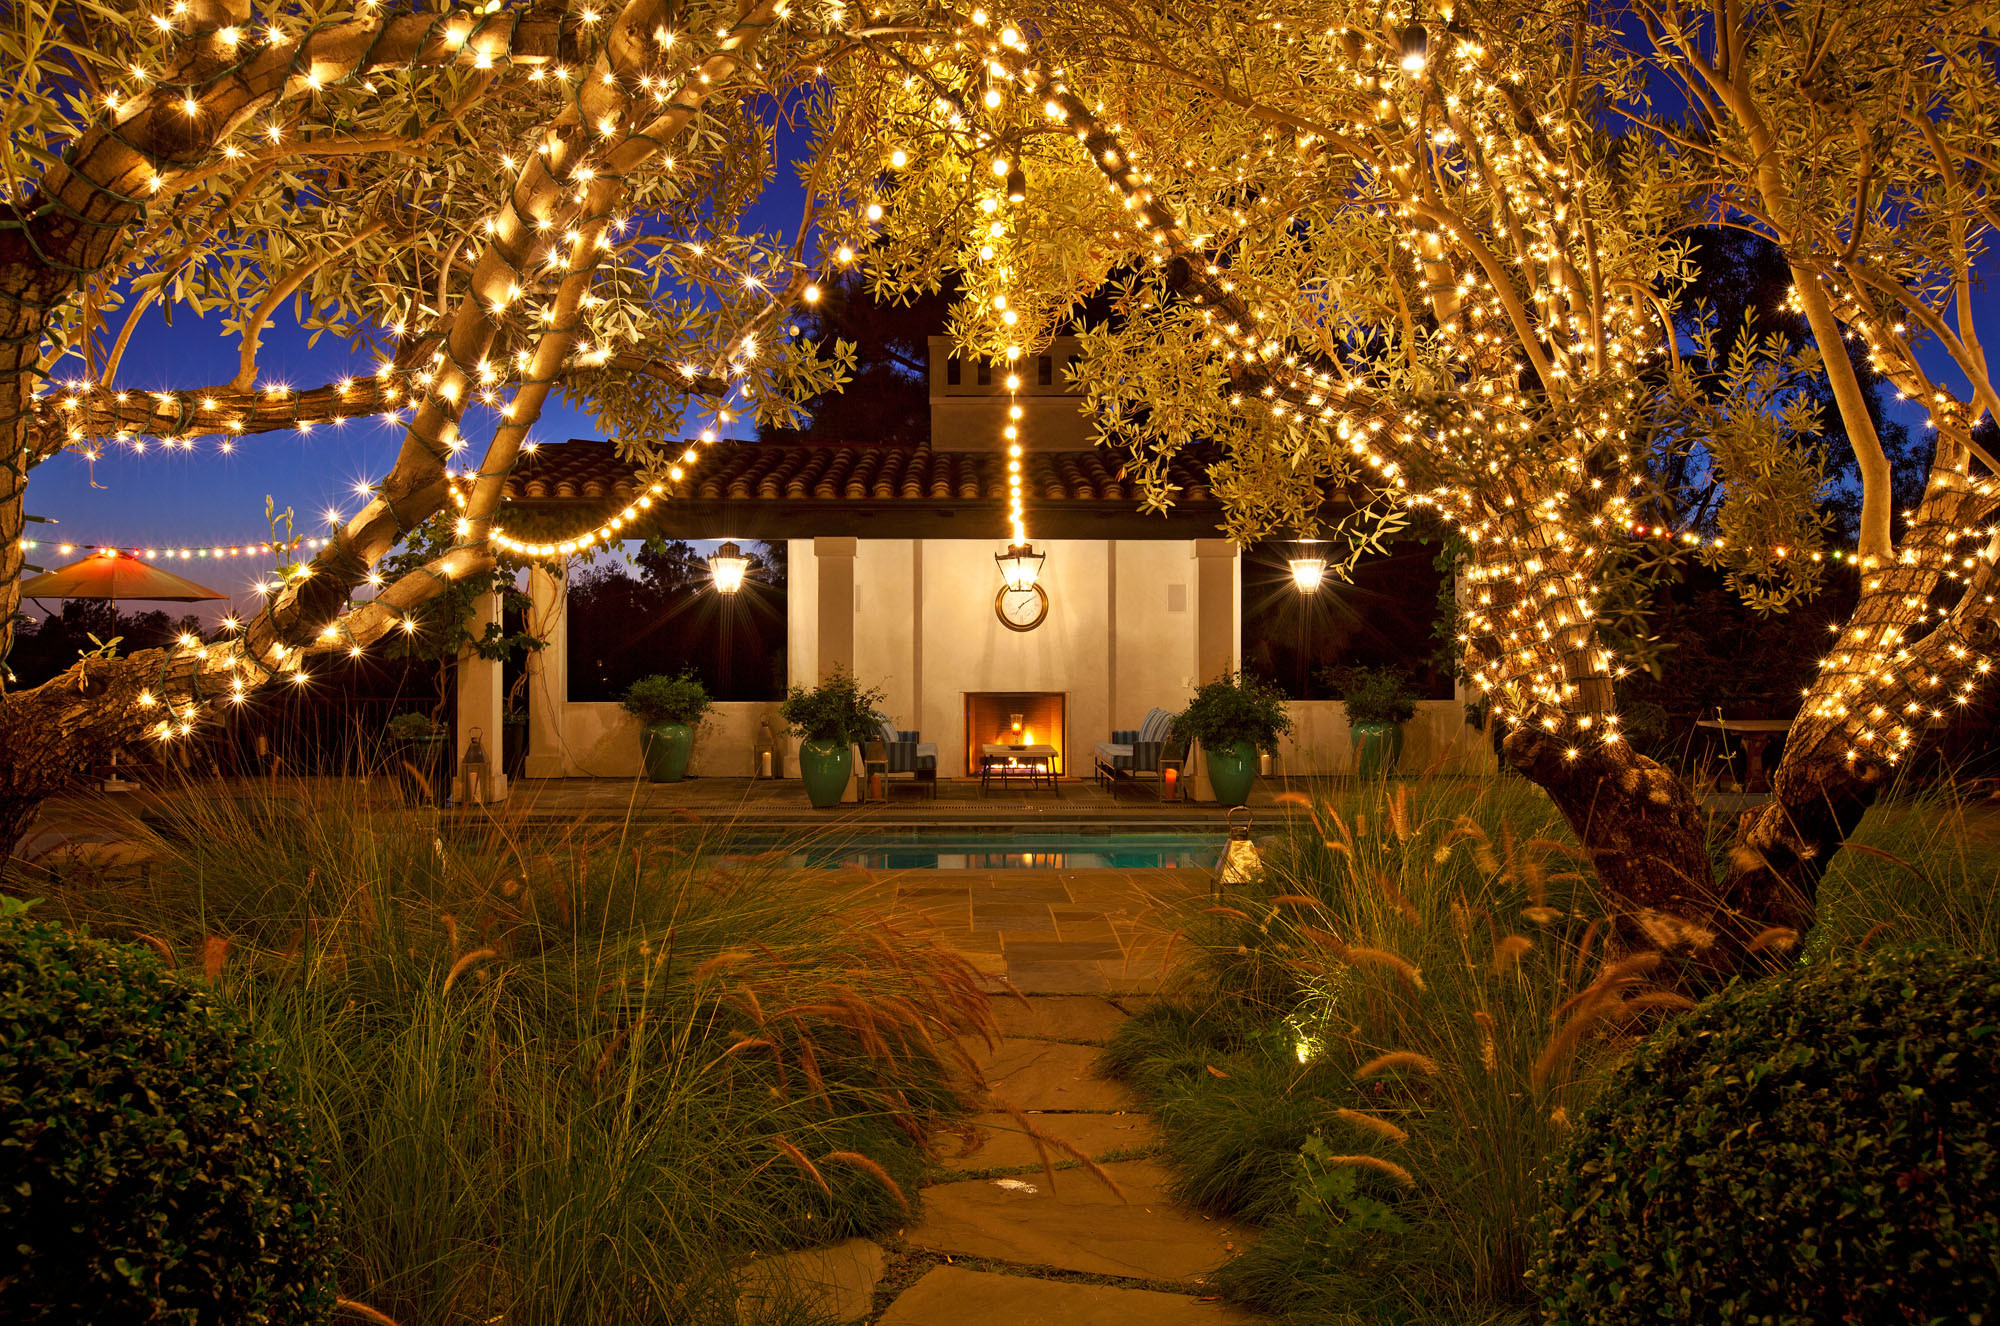 Outdoor Lighting Ideas For Backyard Party
 Backyard party lights